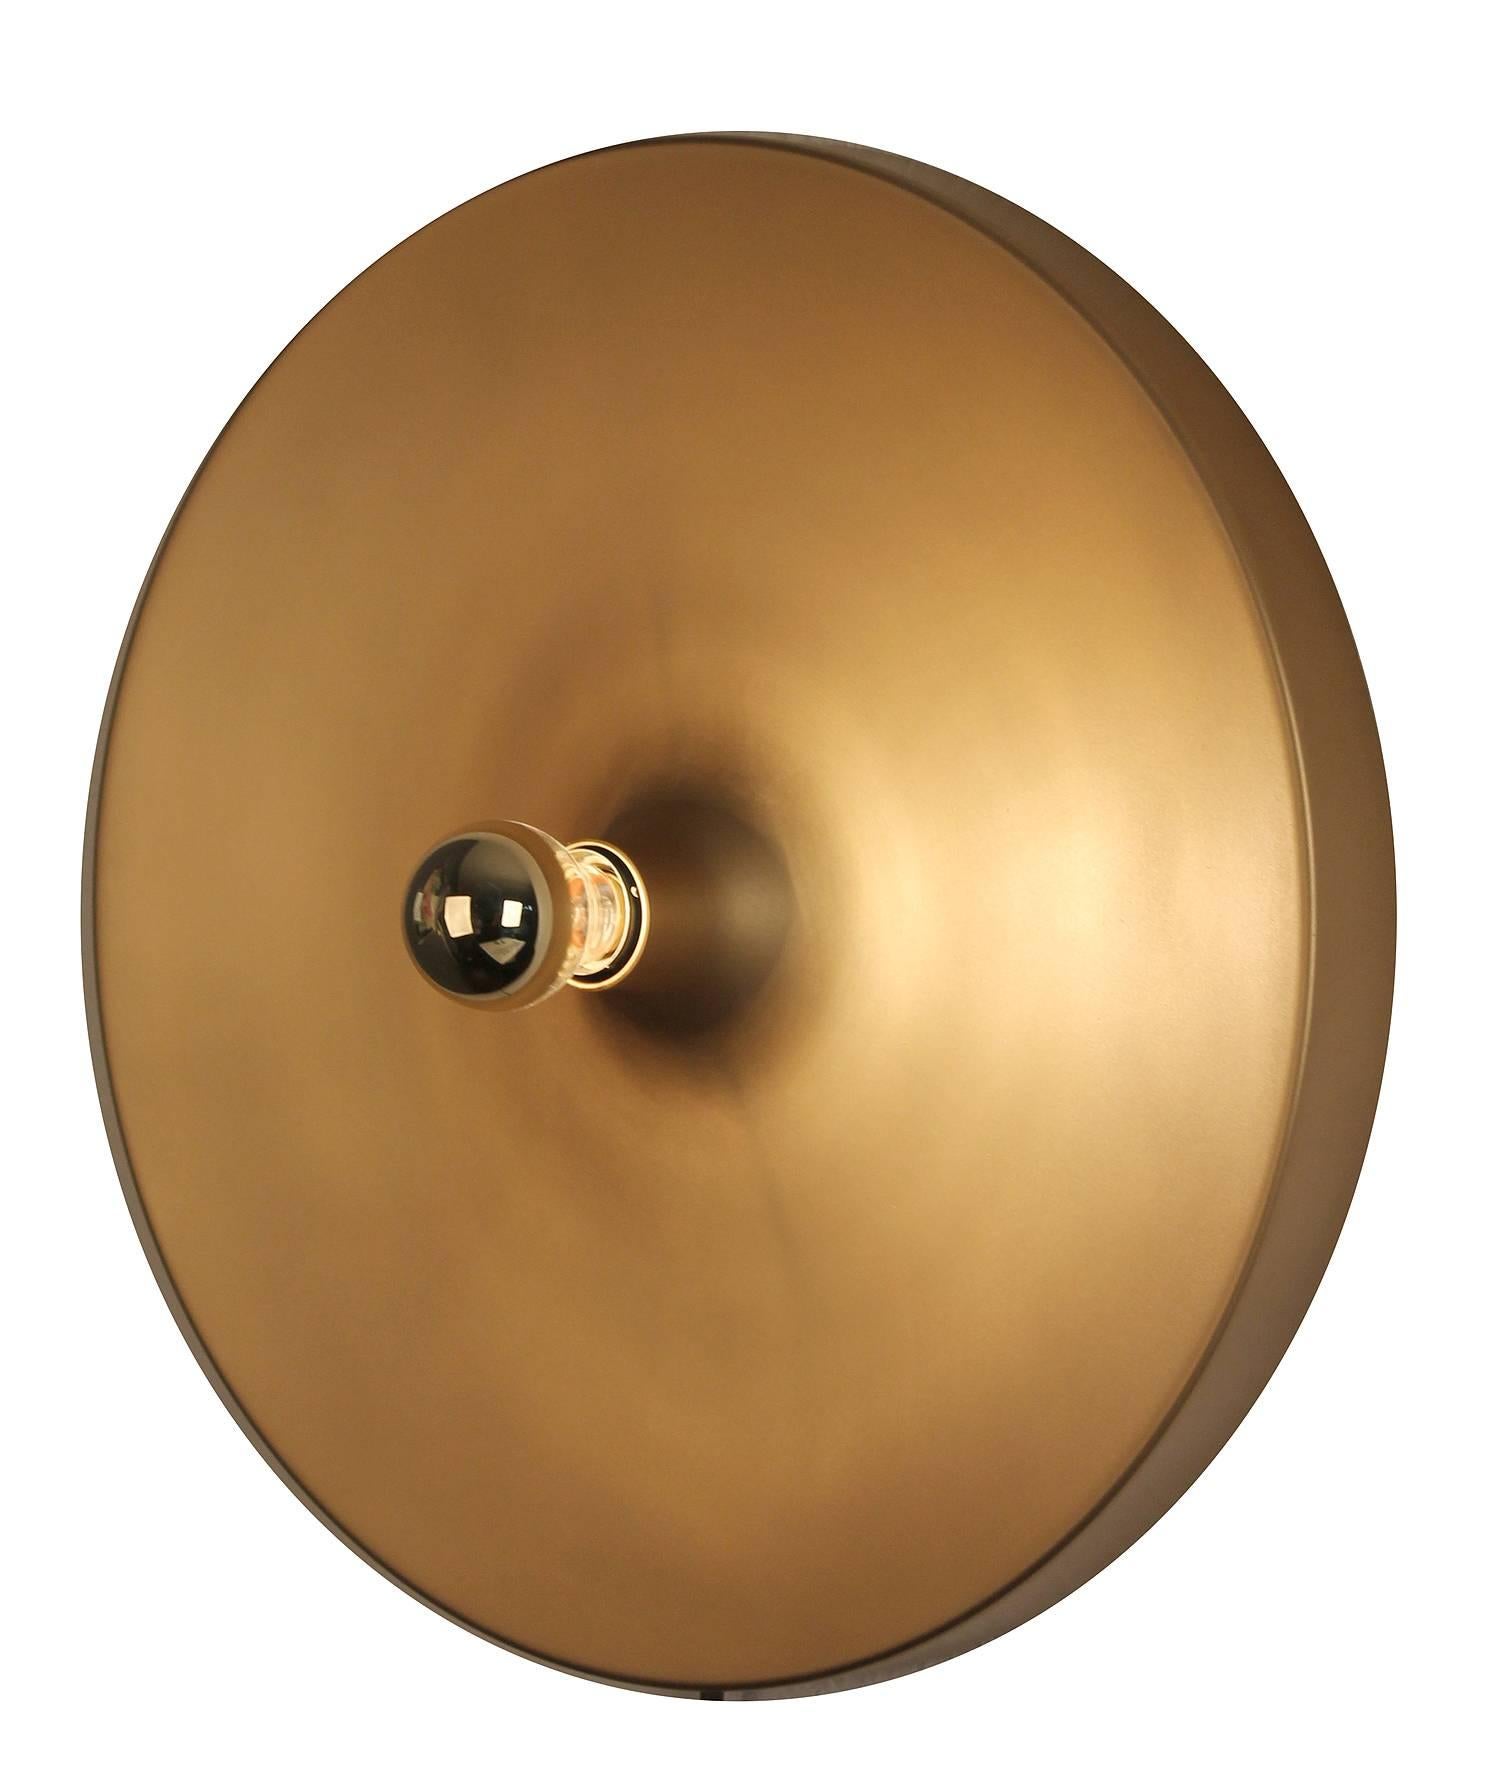 German Large Architectonic MidCentury Disc Sconce Wall Light,  Bronze Finish, 1960s For Sale